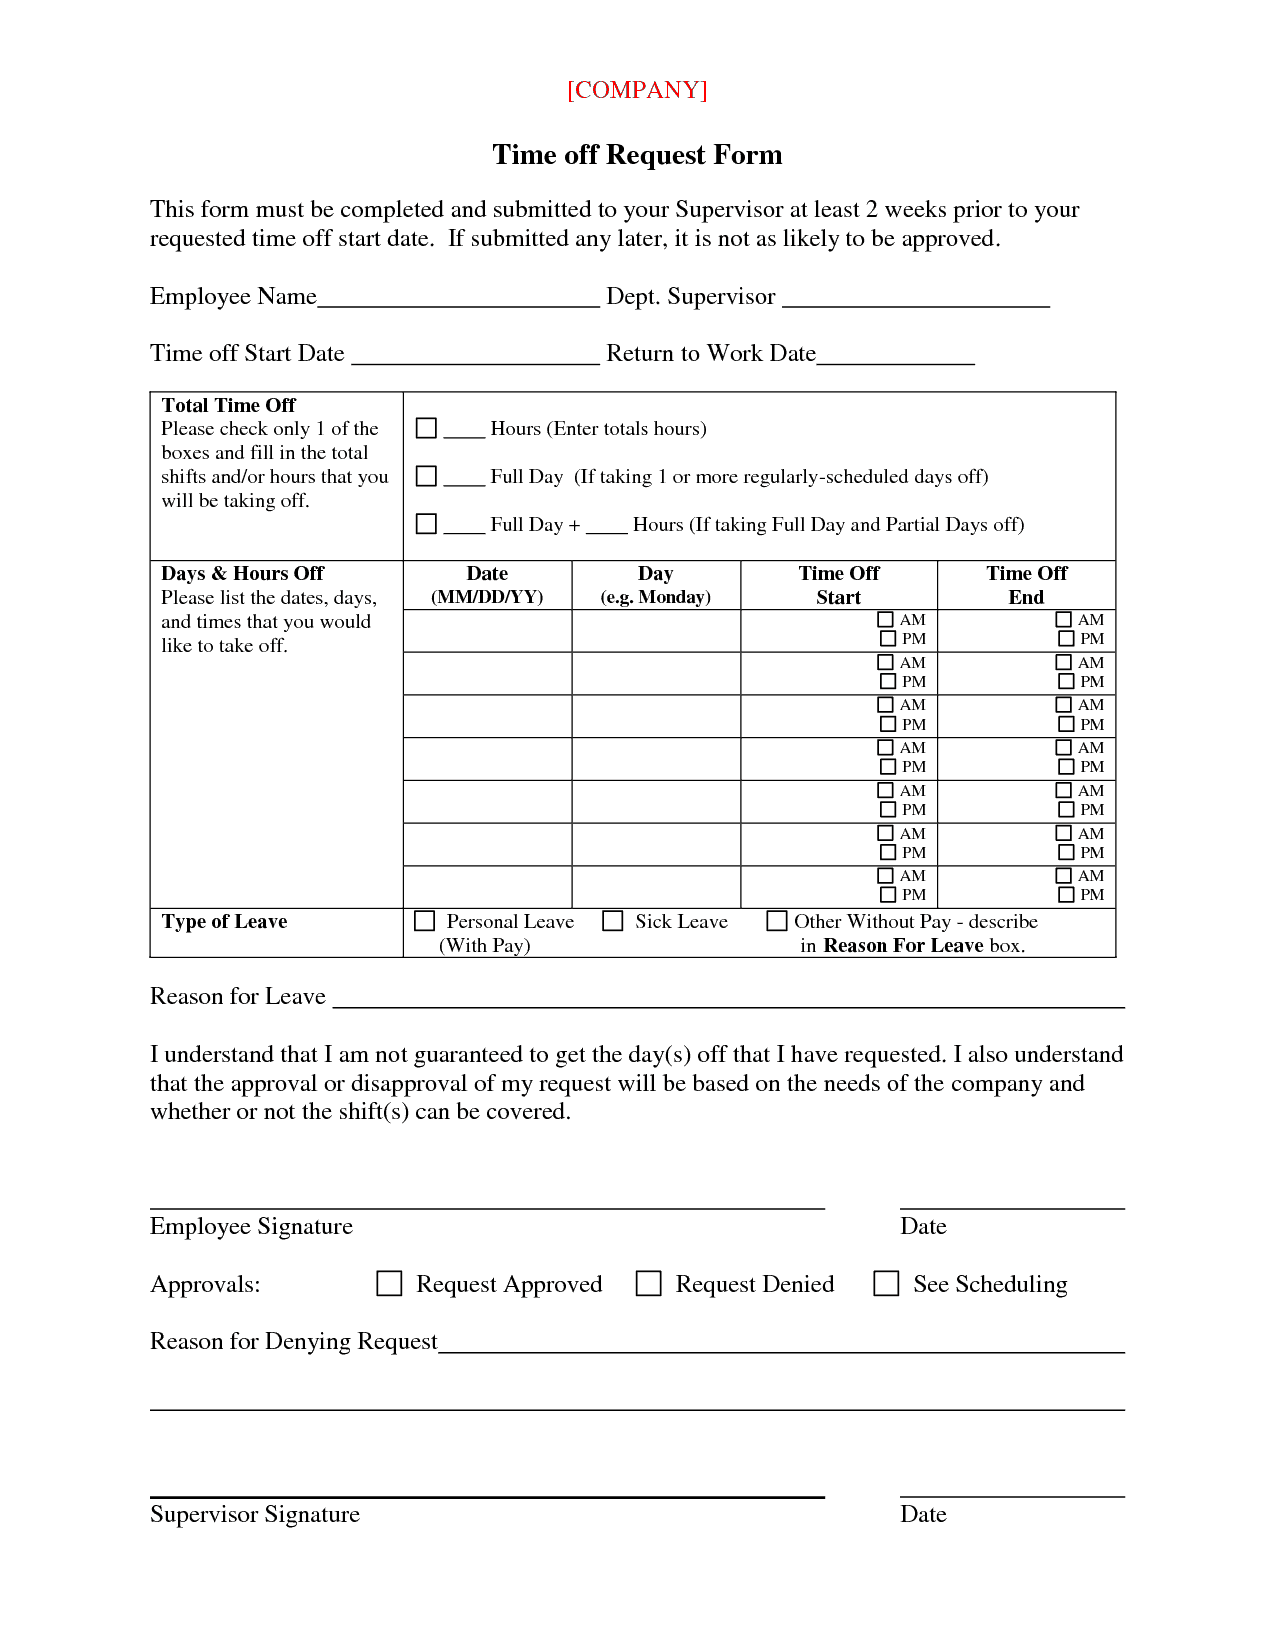 10+ Time Off Request Form Templates - Excel Templates